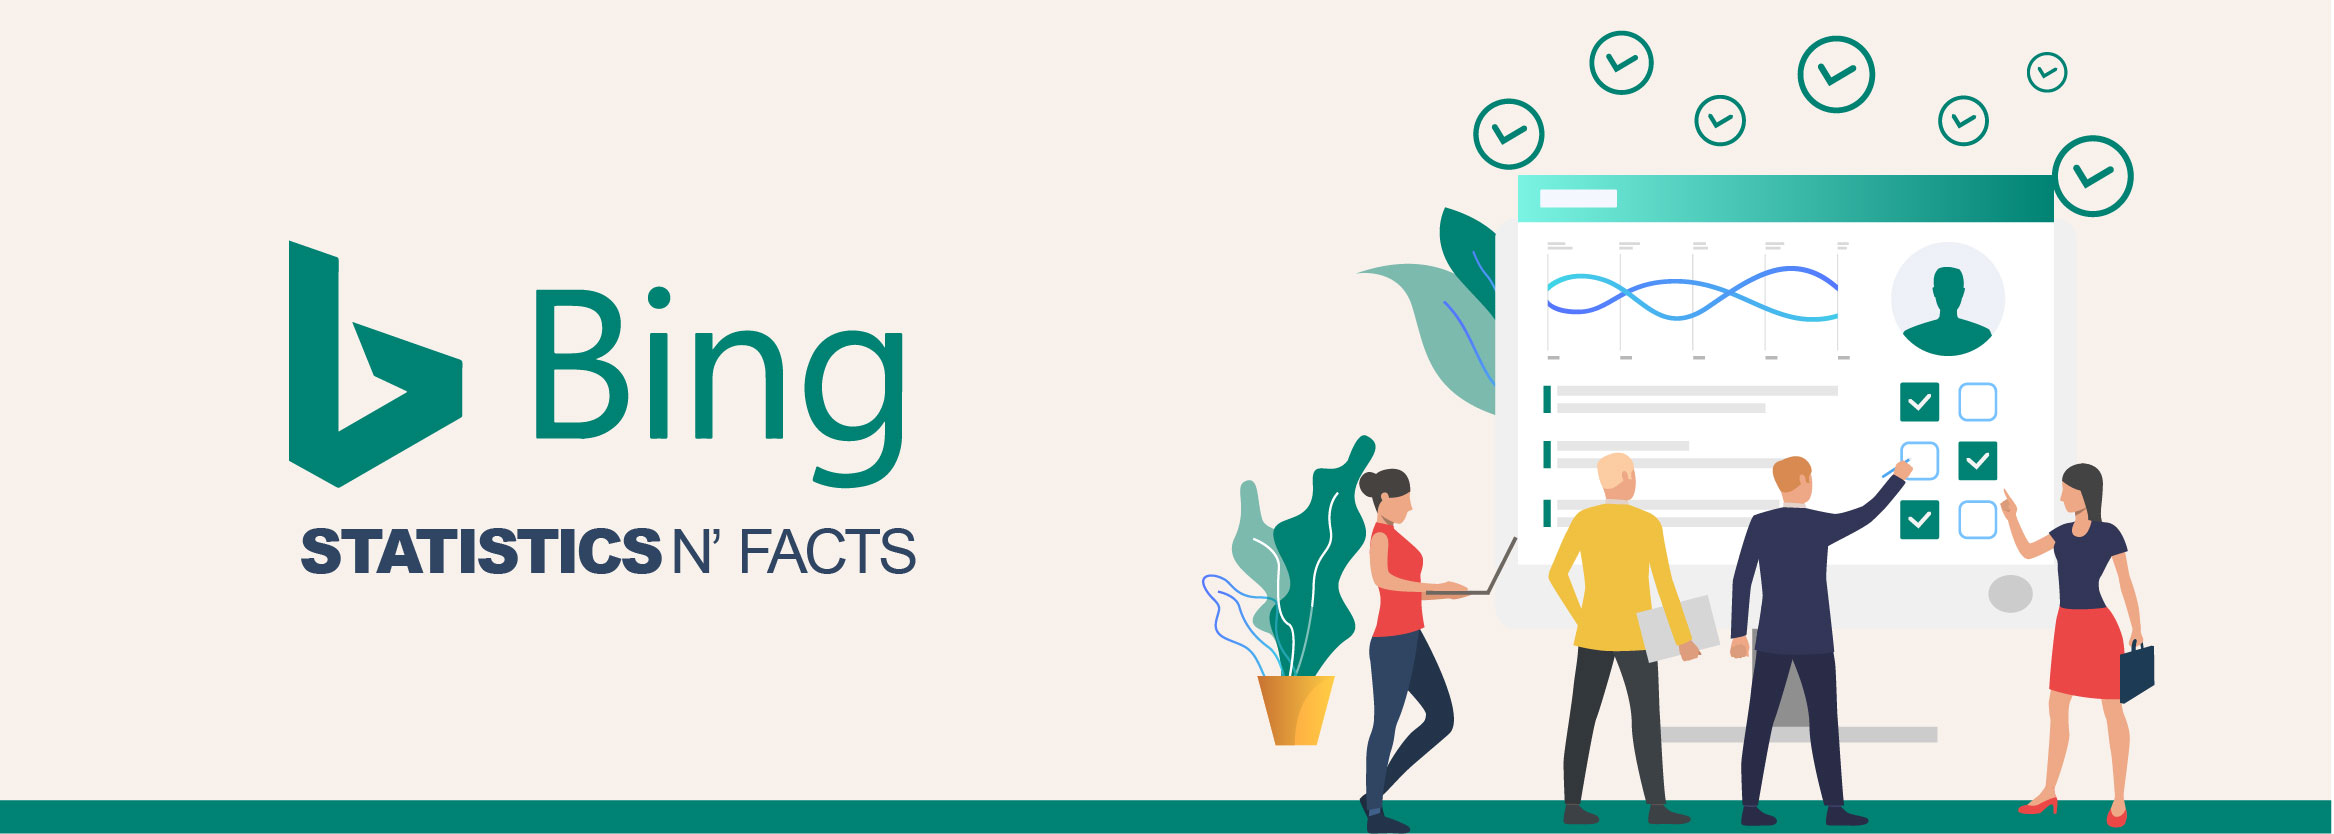 bing statistics and facts